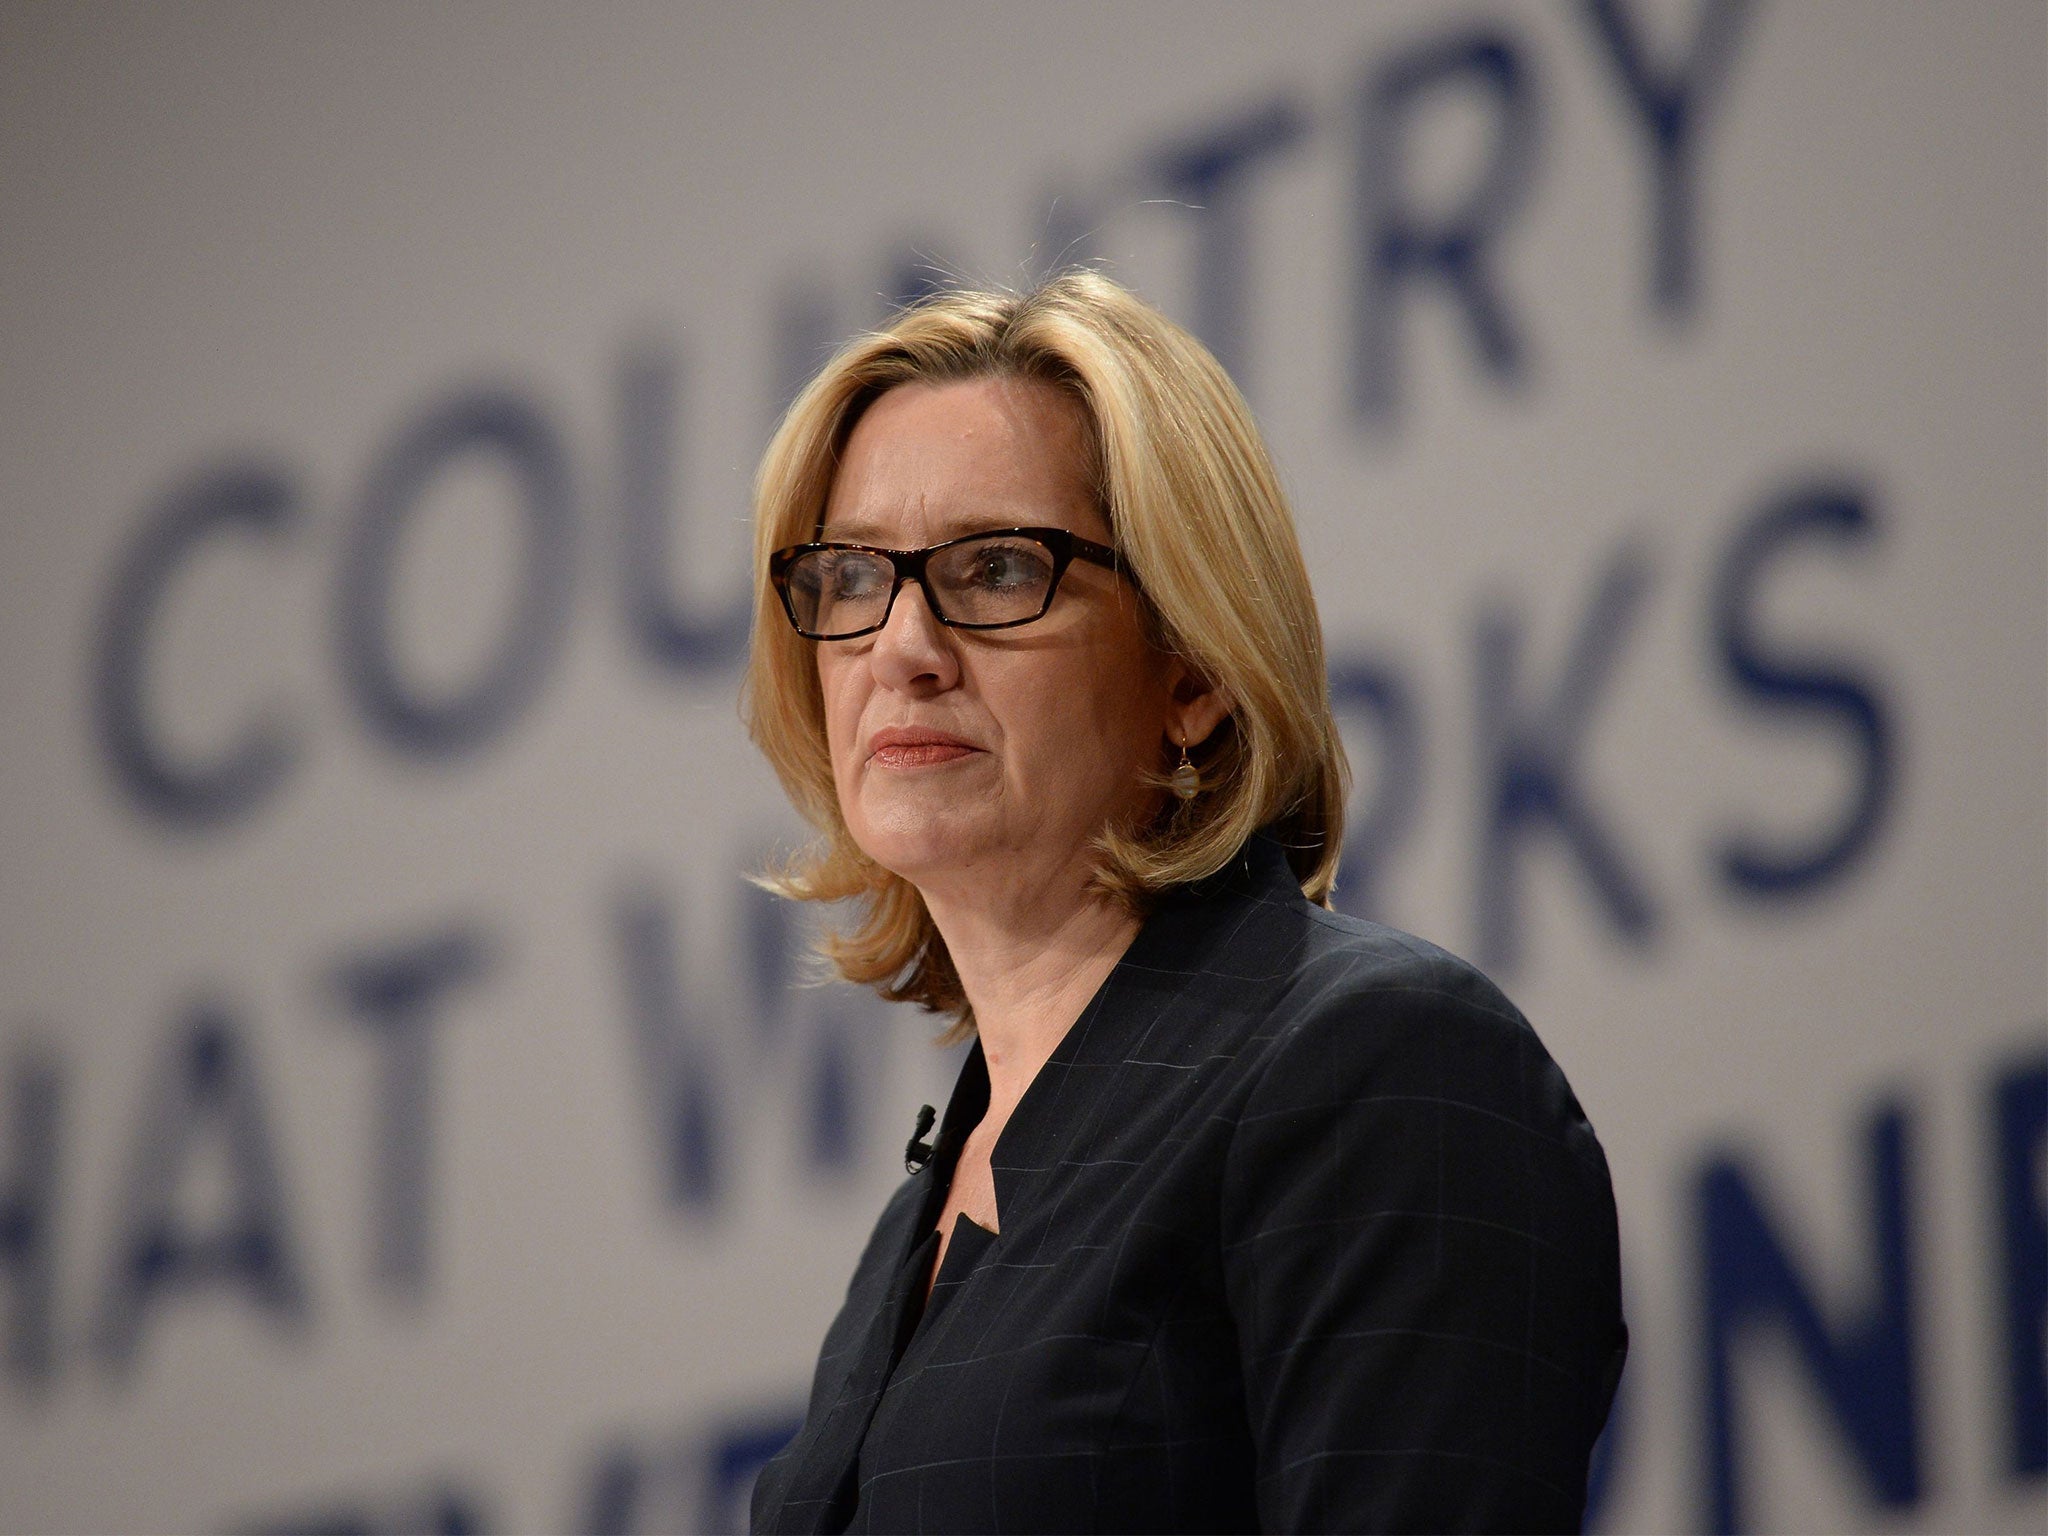 Amber Rudd said that the Government had done more than any before it to tackle abuse and trafficking